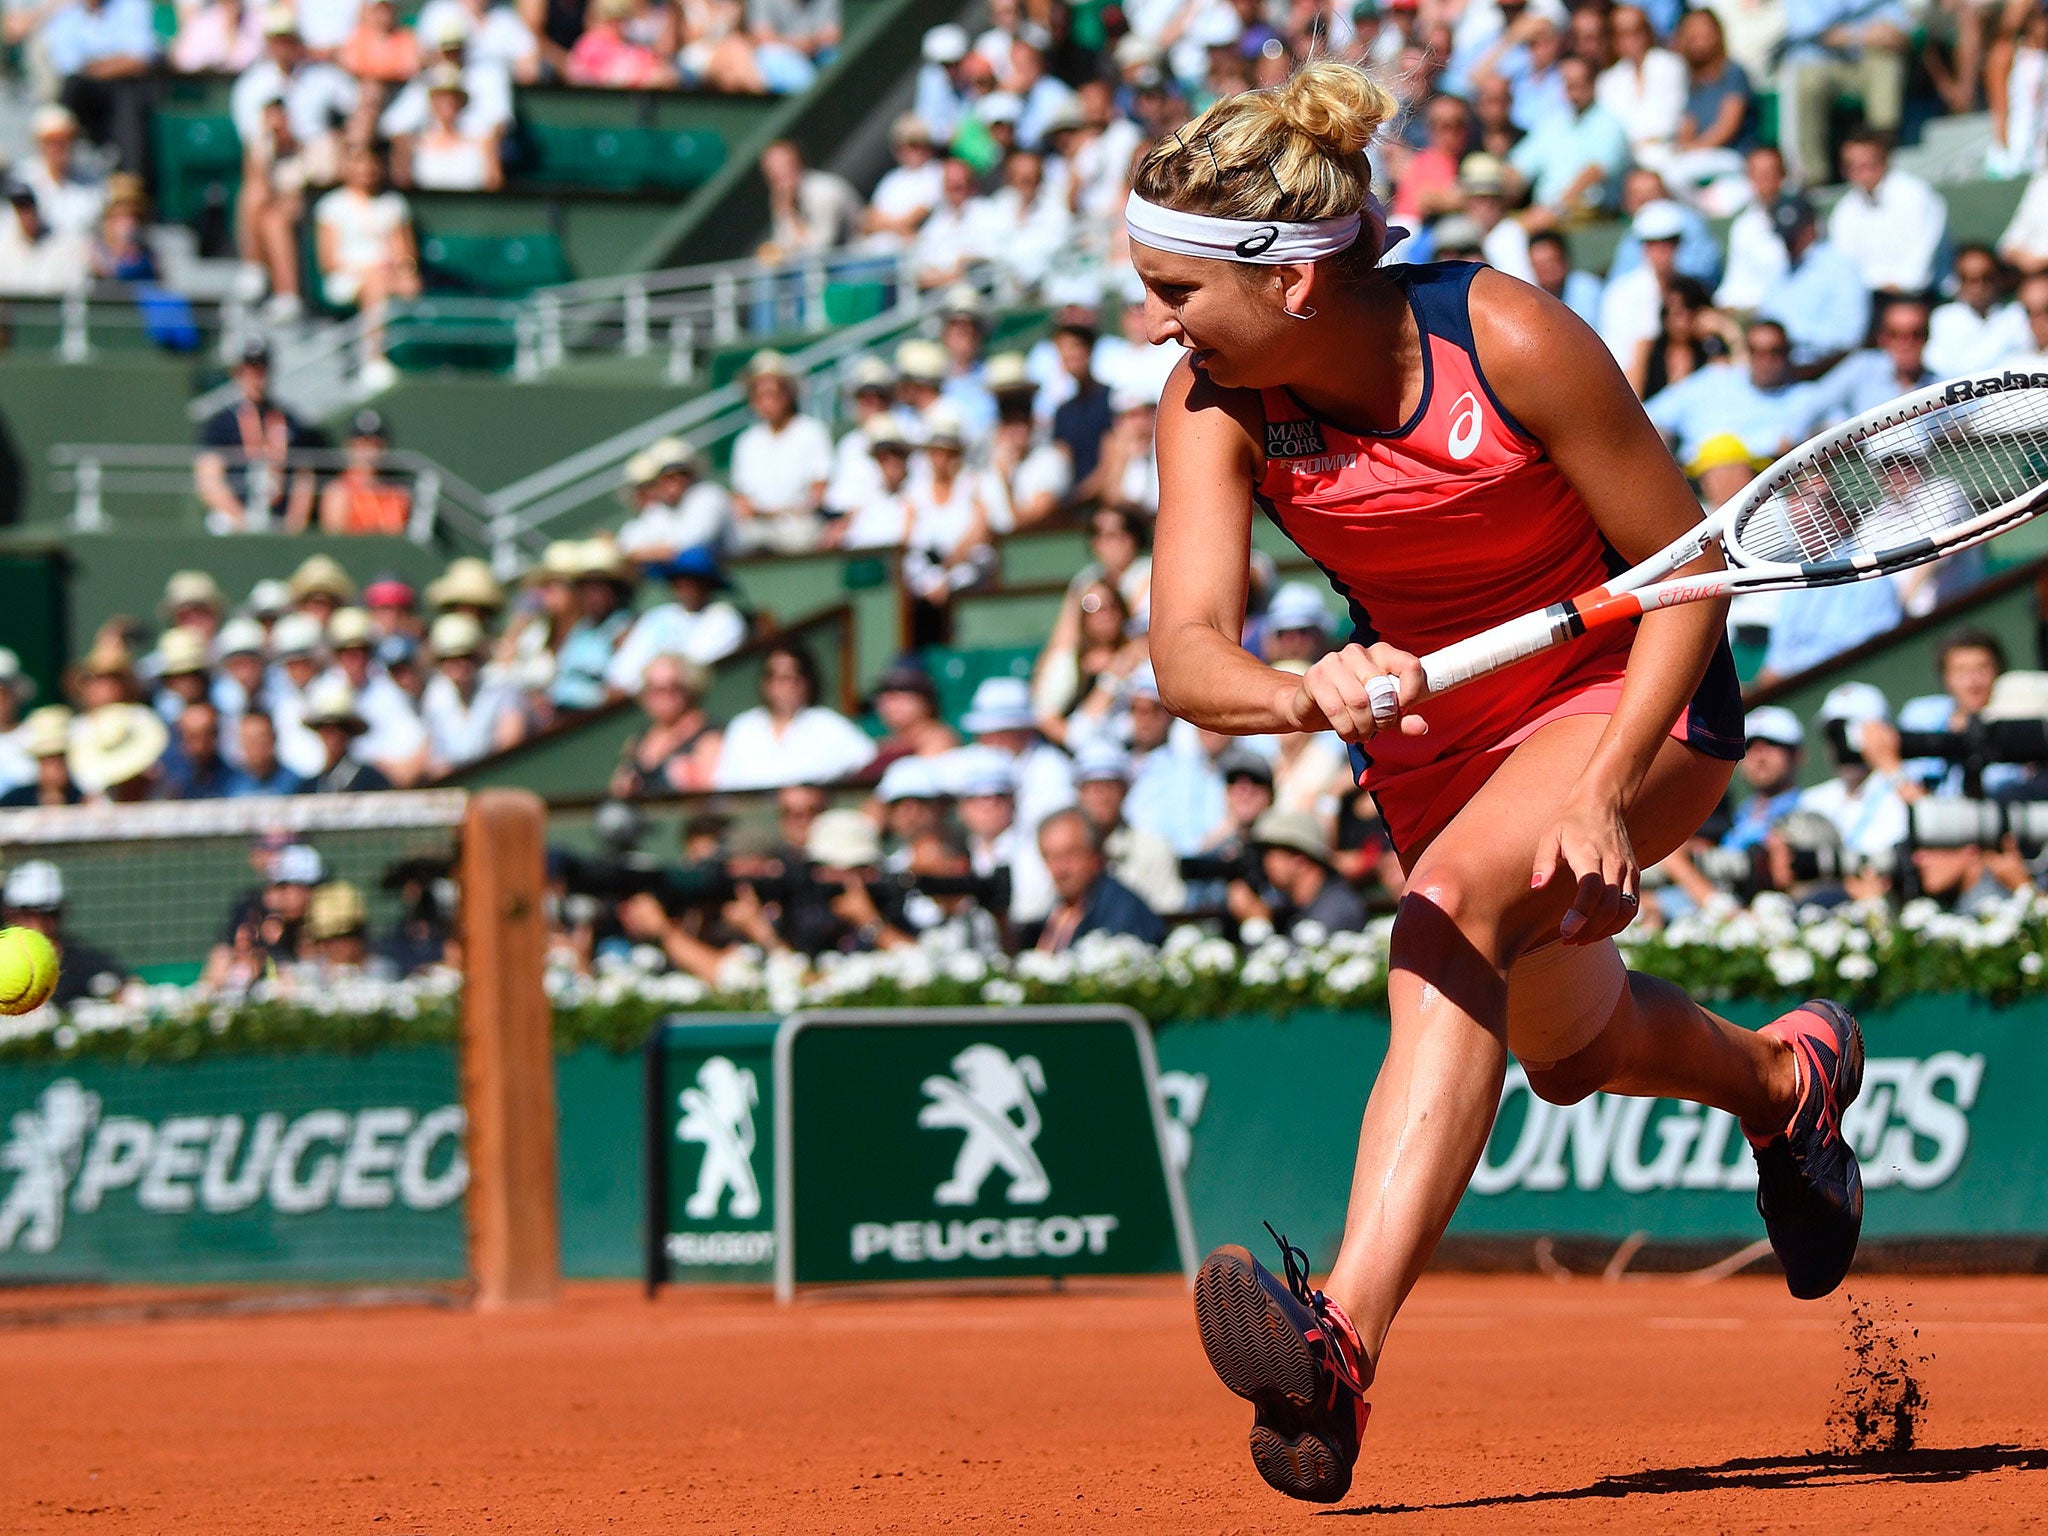 Bacsinszky was competing in her second French Open semi-final in three years